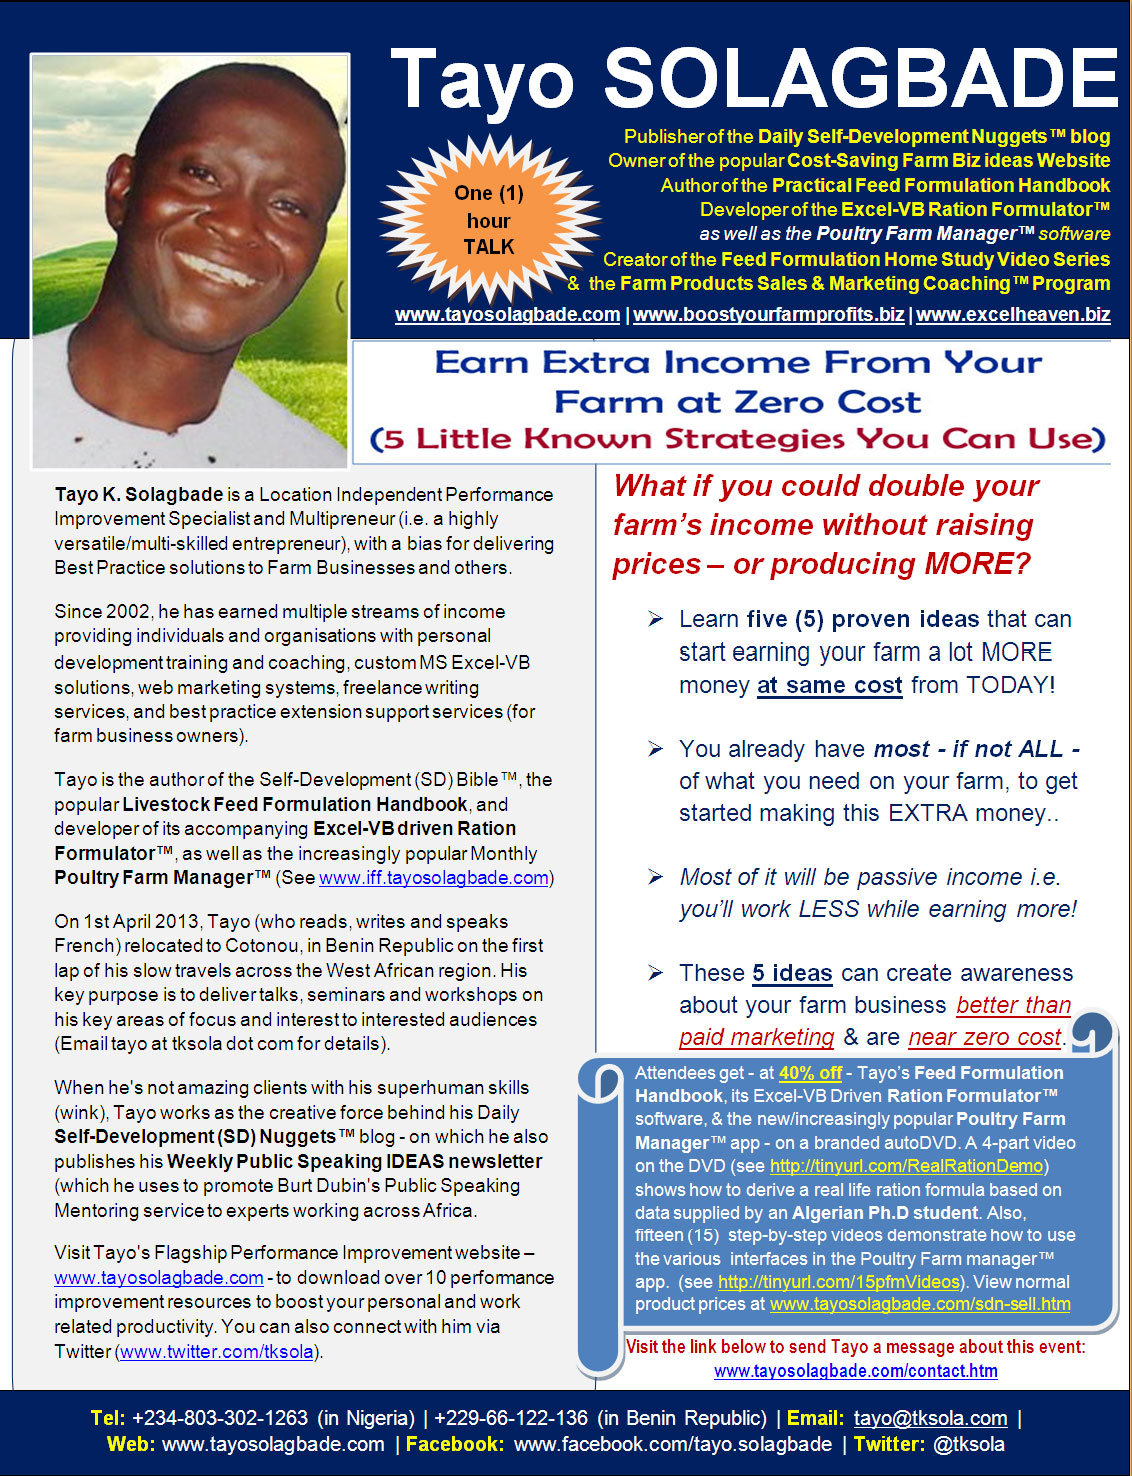 Click to download - PDF Speaker One Sheet for Tayo Solagbade's ONE HOUR TALK titled 'Earn Extra Income from Your Farm at ZERO COST (5 Little Known Strategies You Can Use)' 